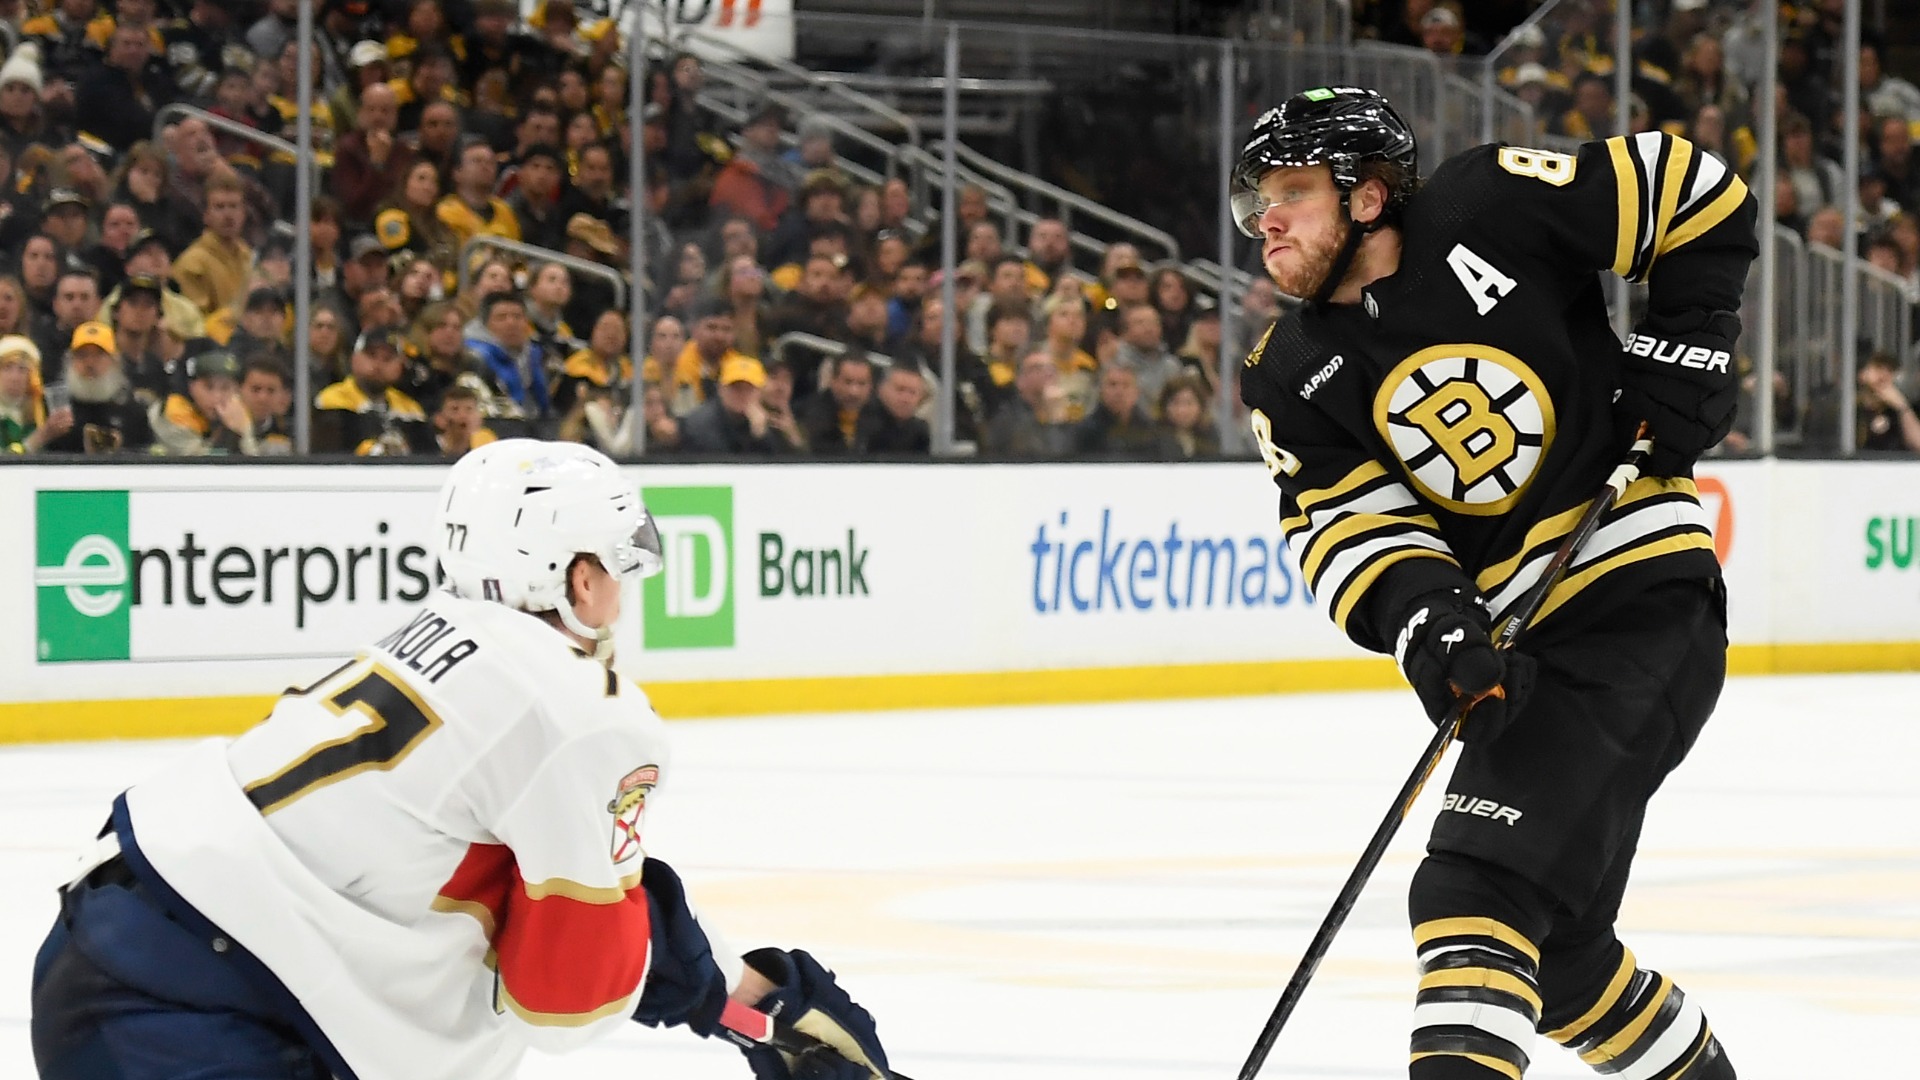 How David Pastrnak Thinks Bruins Can Get On Same Page As Officials